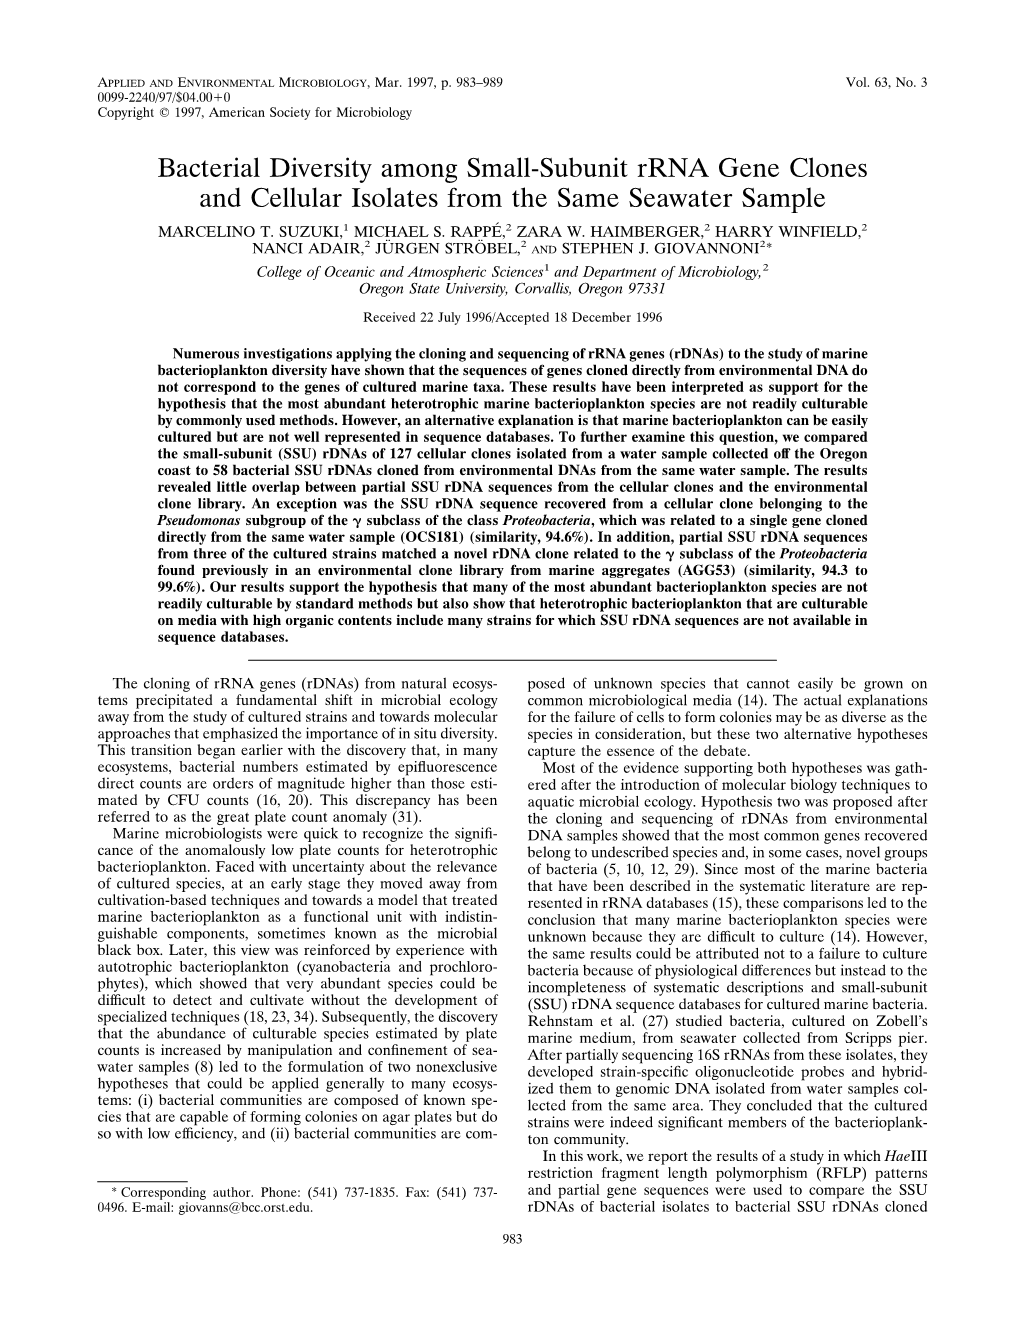 Bacterial Diversity Among Small-Subunit Rrna Gene Clones and Cellular Isolates from the Same Seawater Sample MARCELINO T